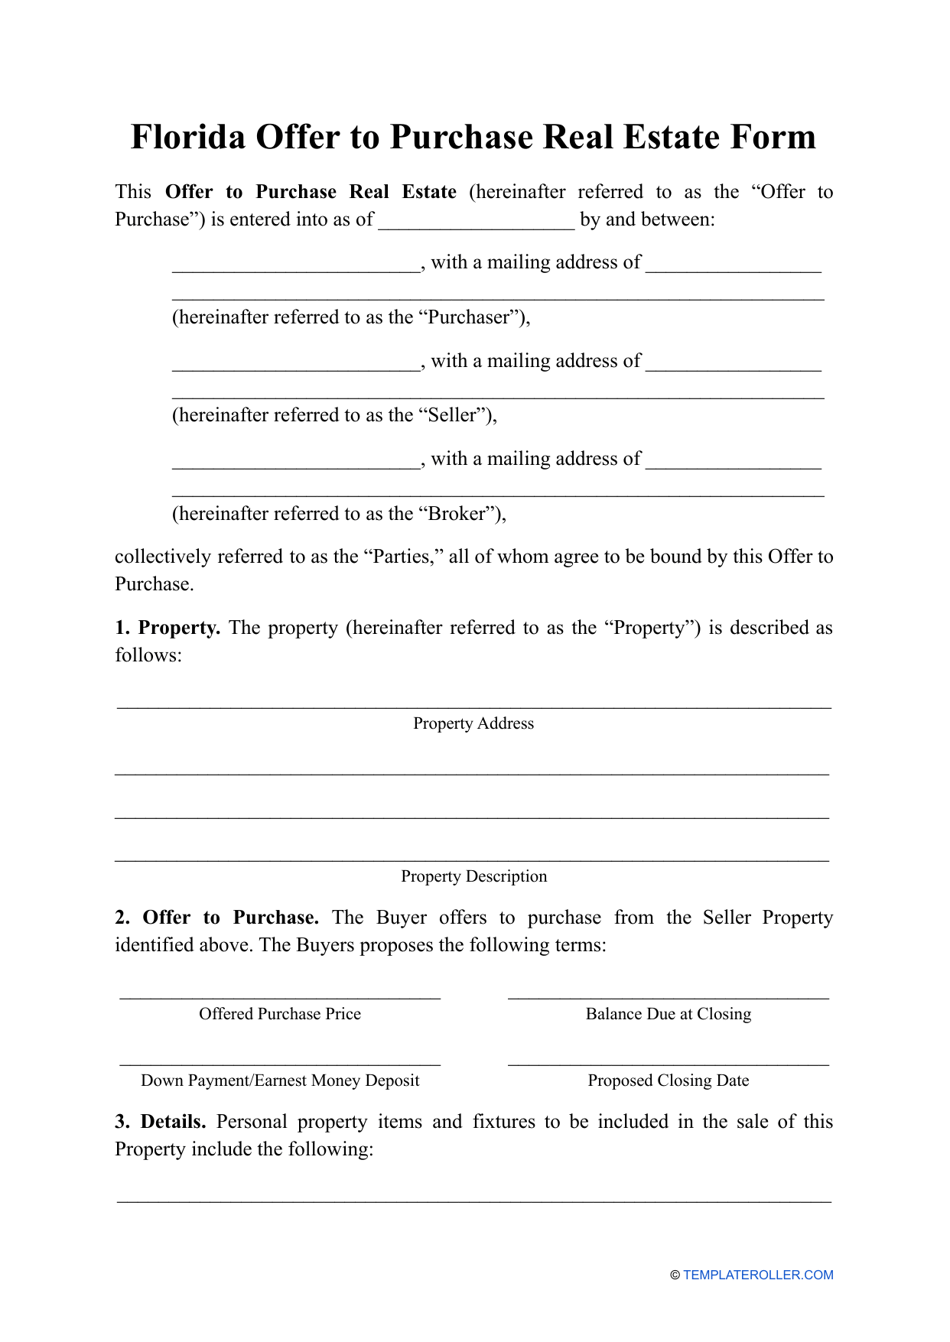 Offer to Purchase Real Estate Form - Florida, Page 1